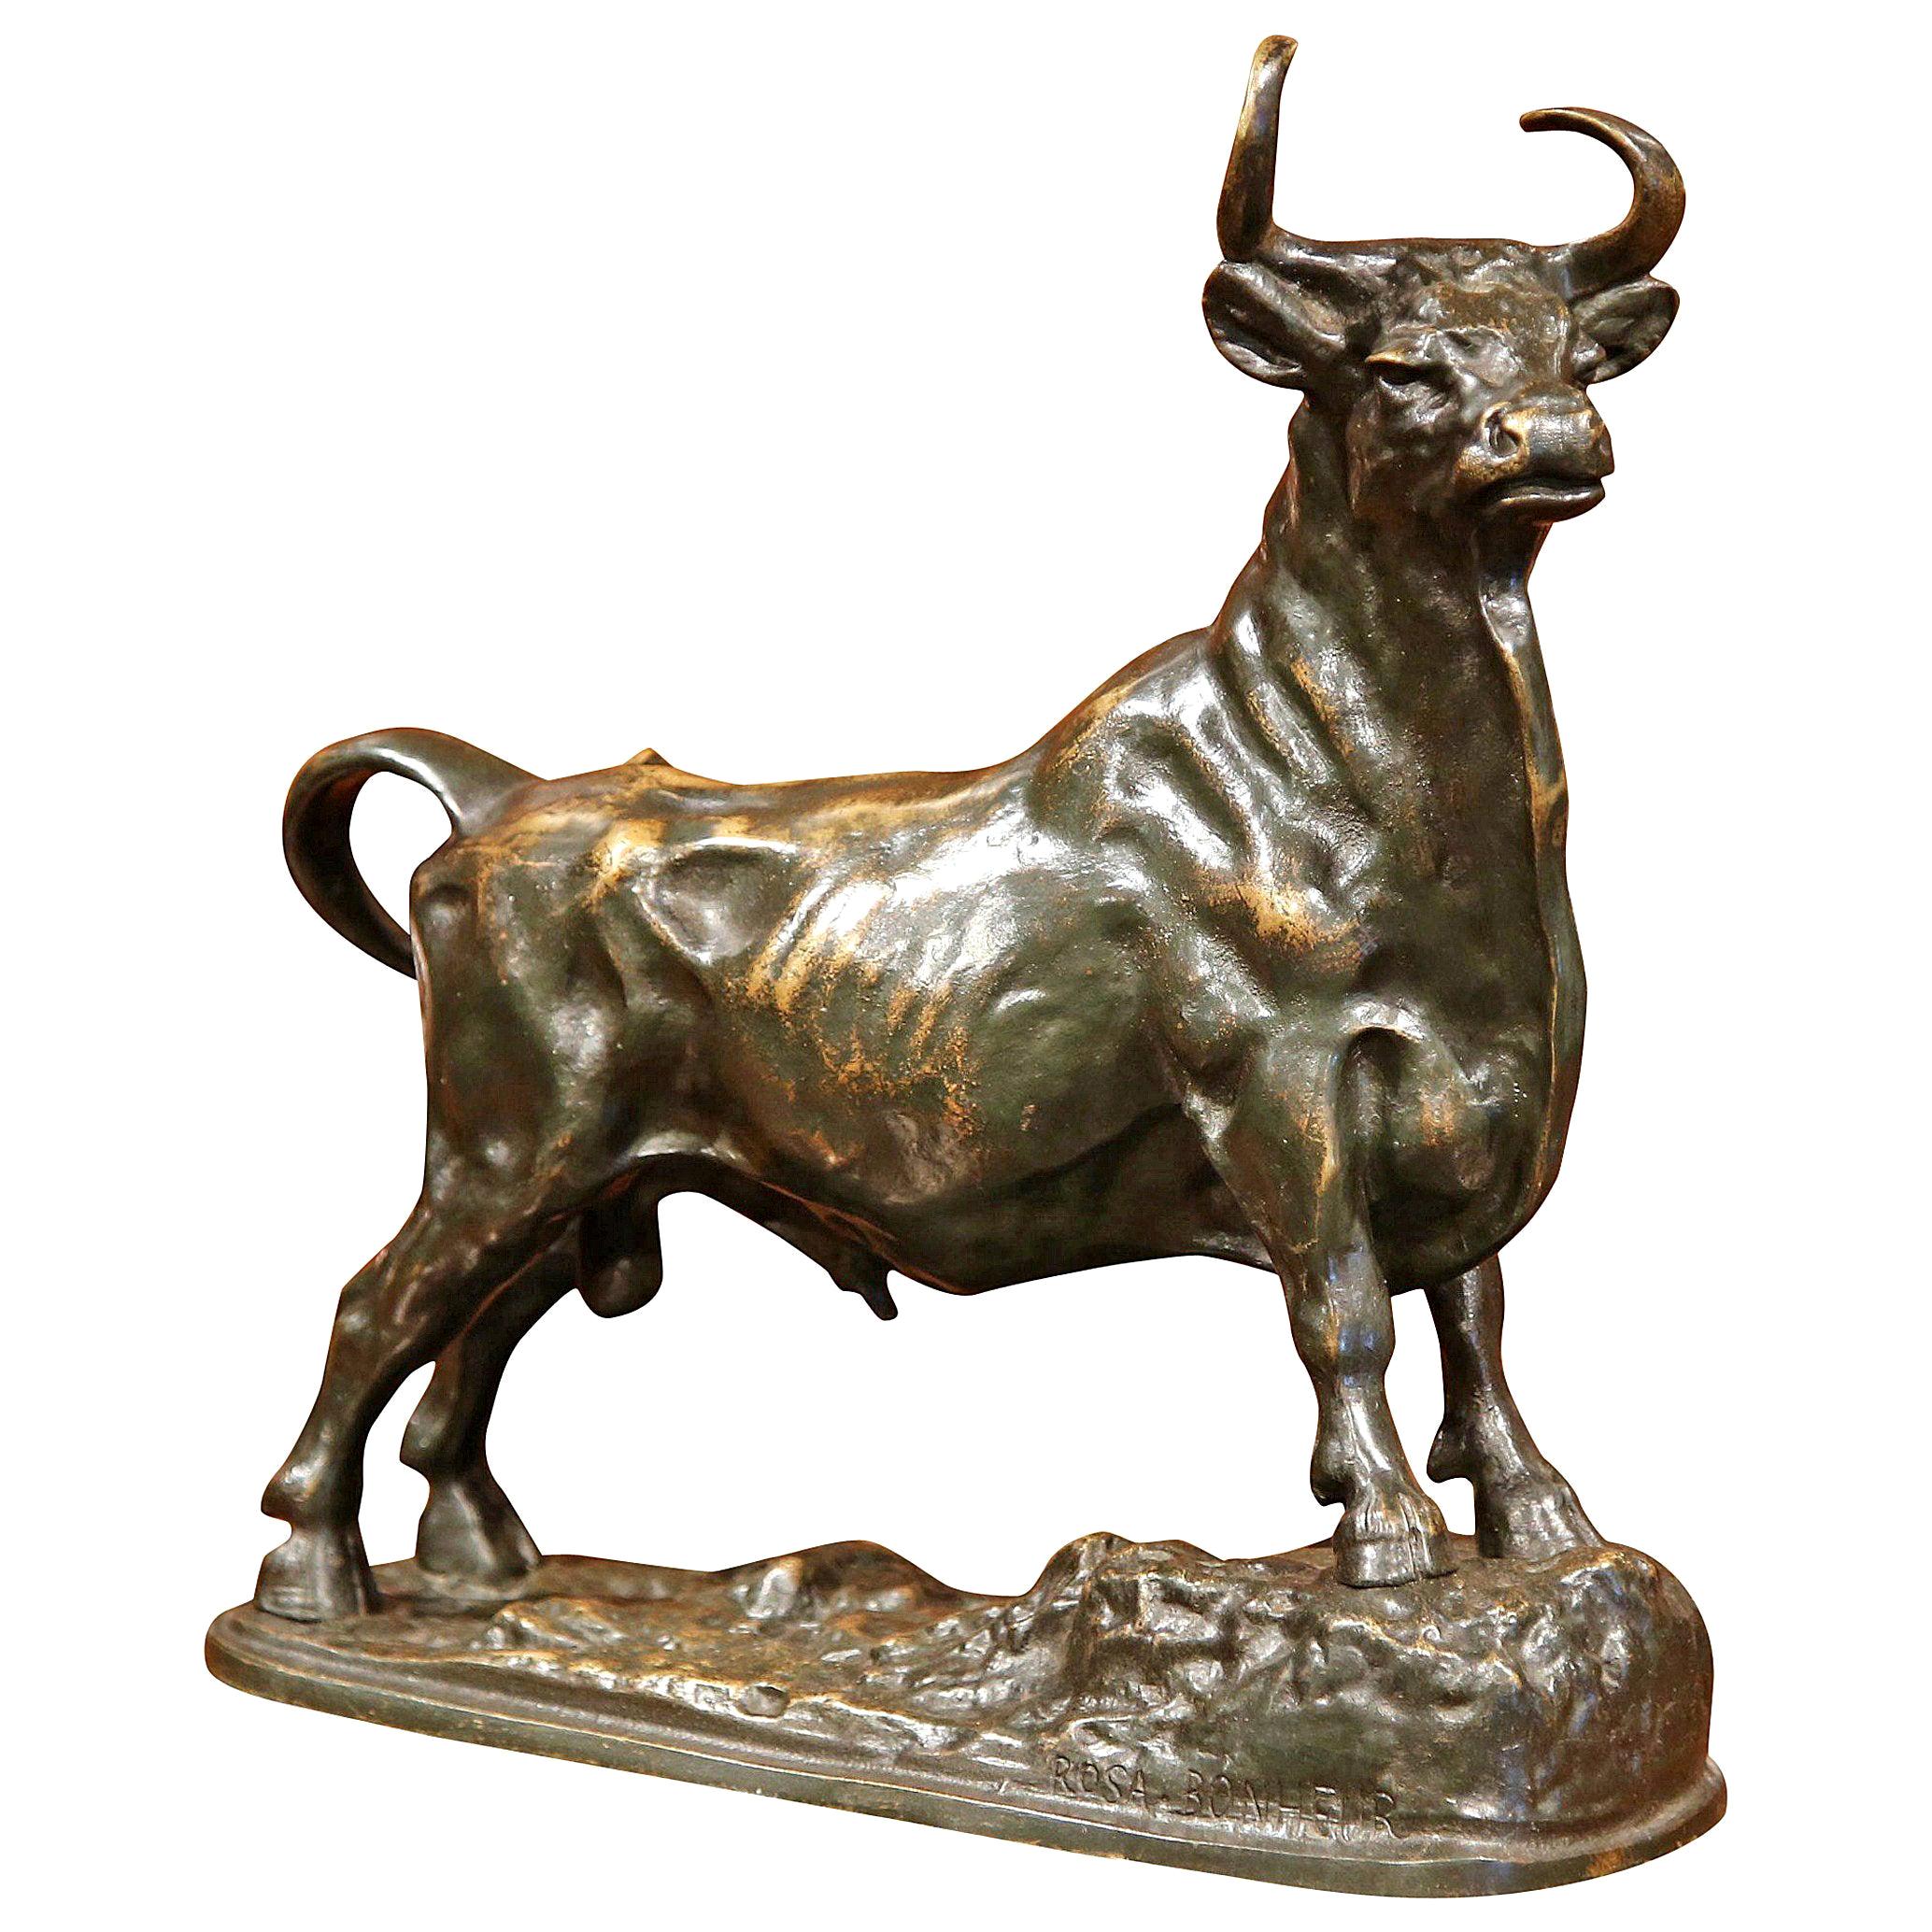 Mid-19th Century French Patinated Bronze Bull Sculpture Signed Rosa Bonheur